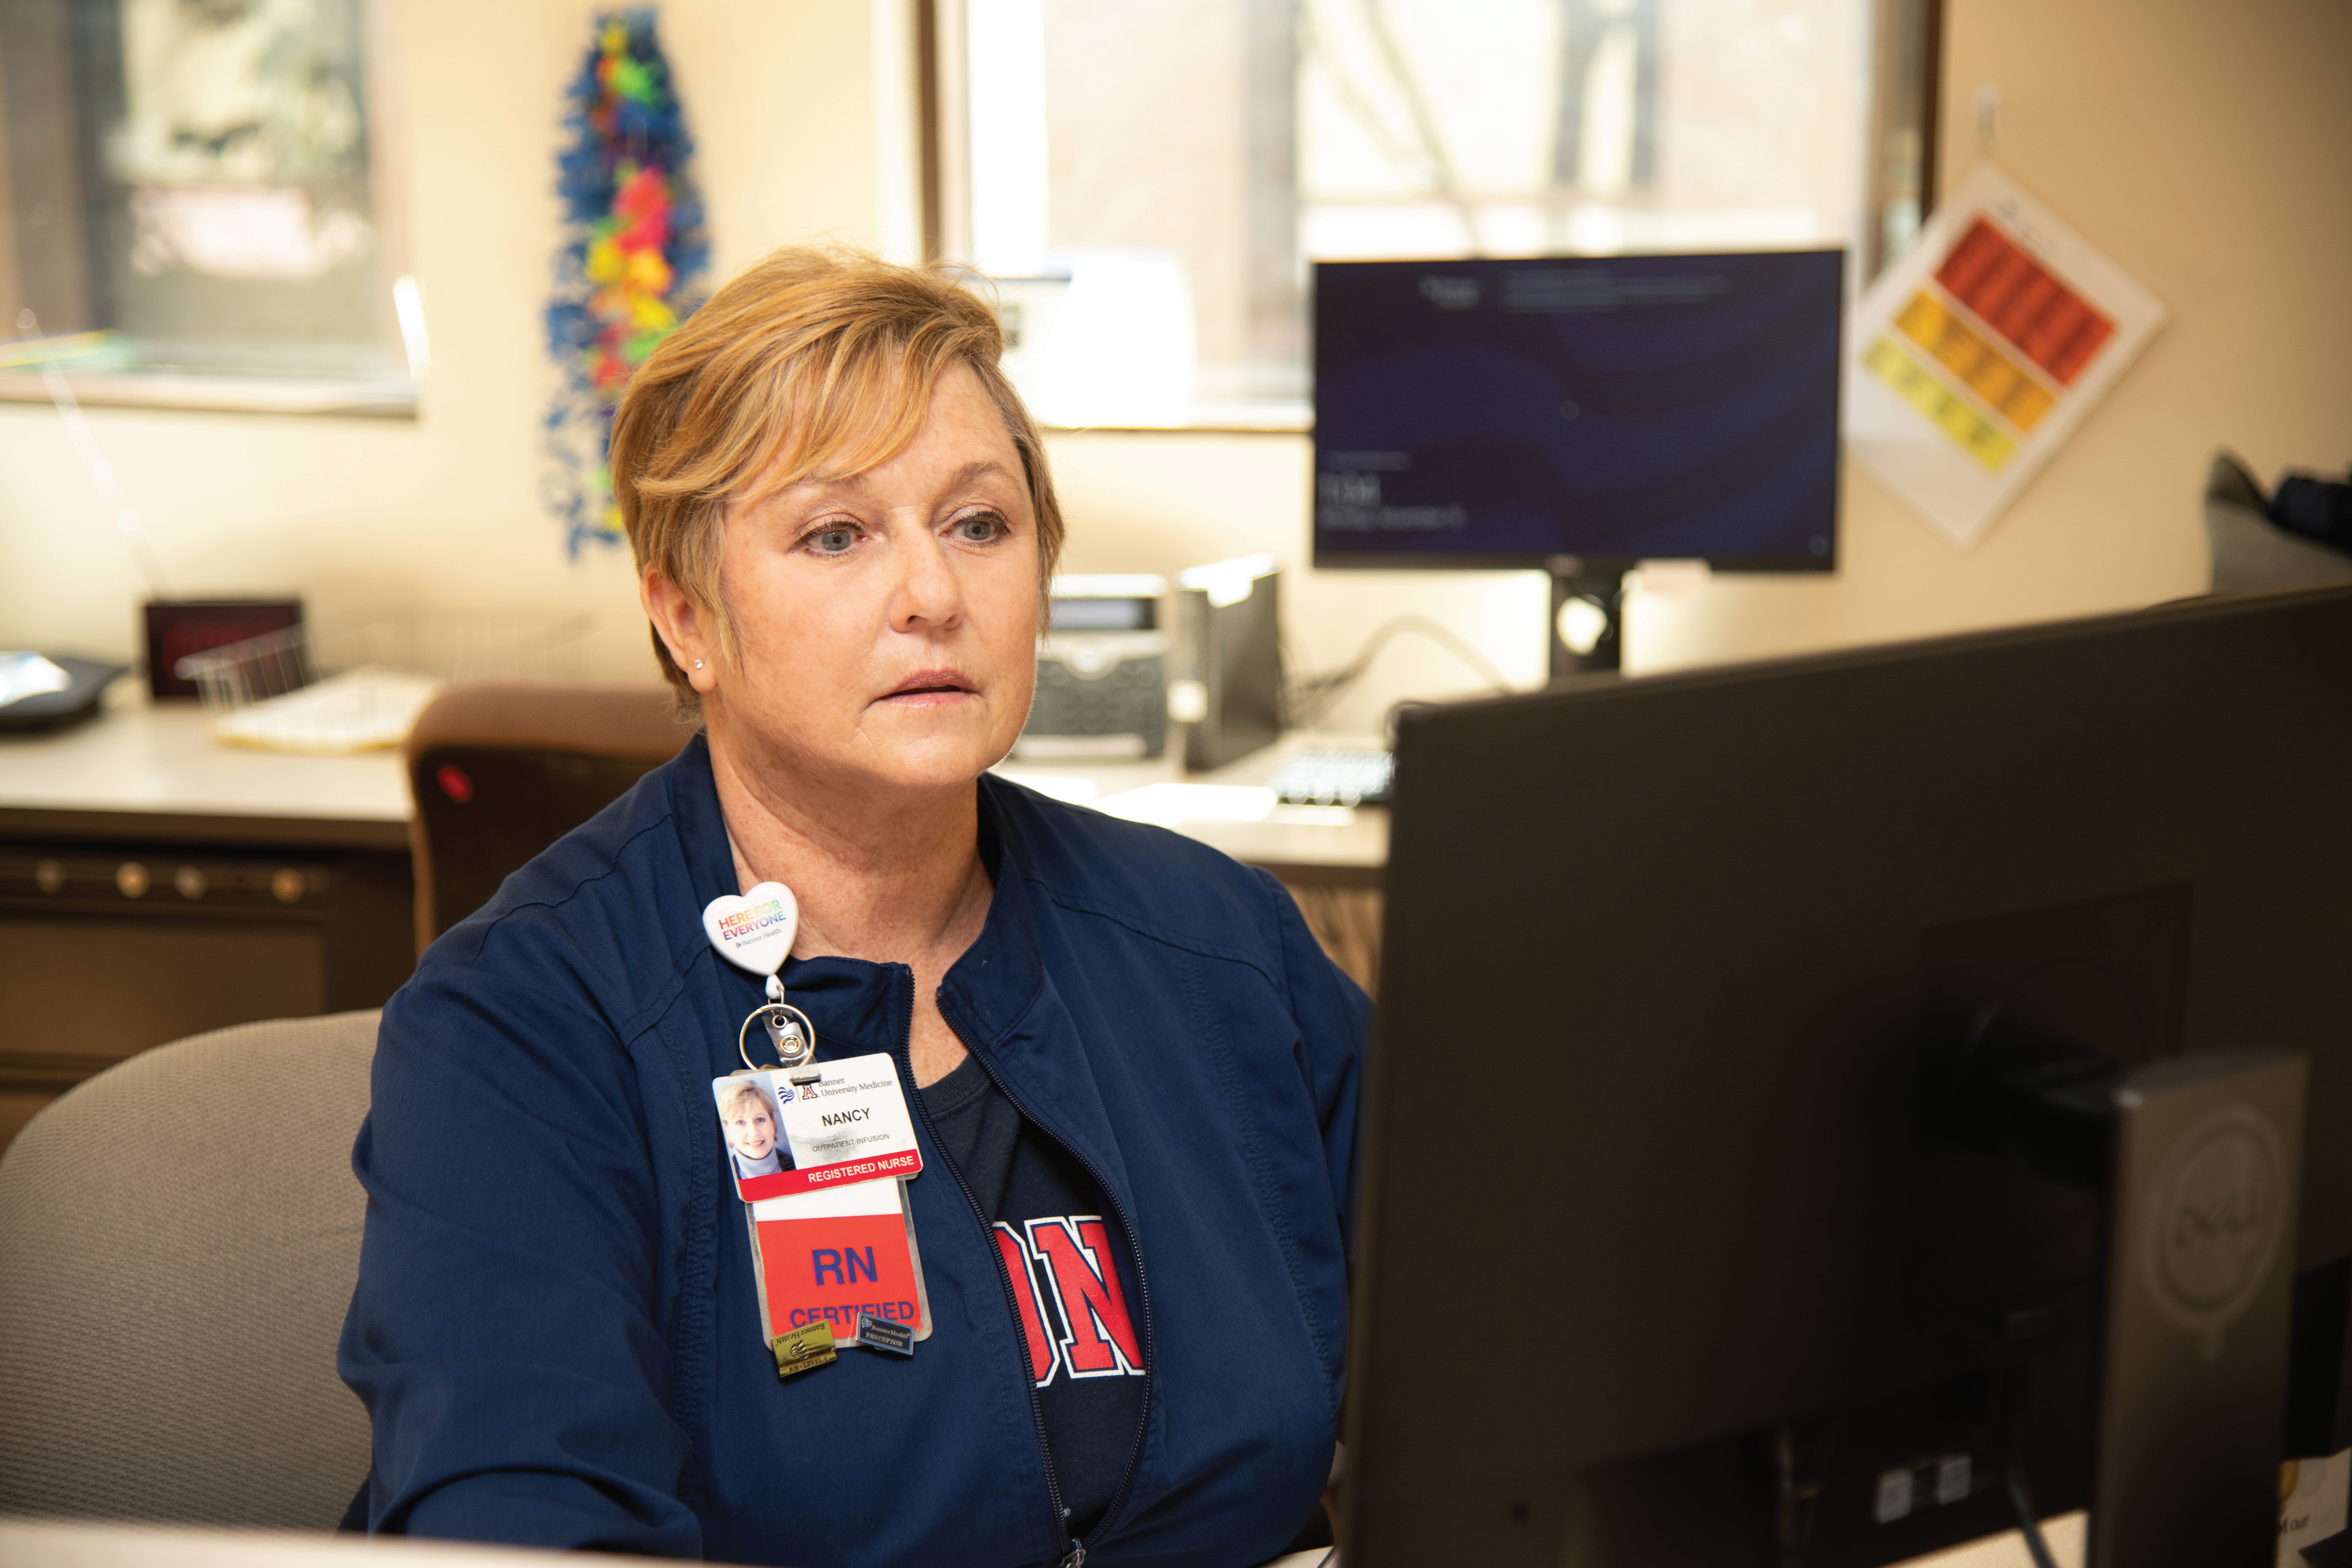 ONS member Nancy Harrington, RN, BSN, MS, OCN®, infusion nurse at Banner University Medical Center in Tucson, AZ, and member of the Southern Arizona ONS Chapter